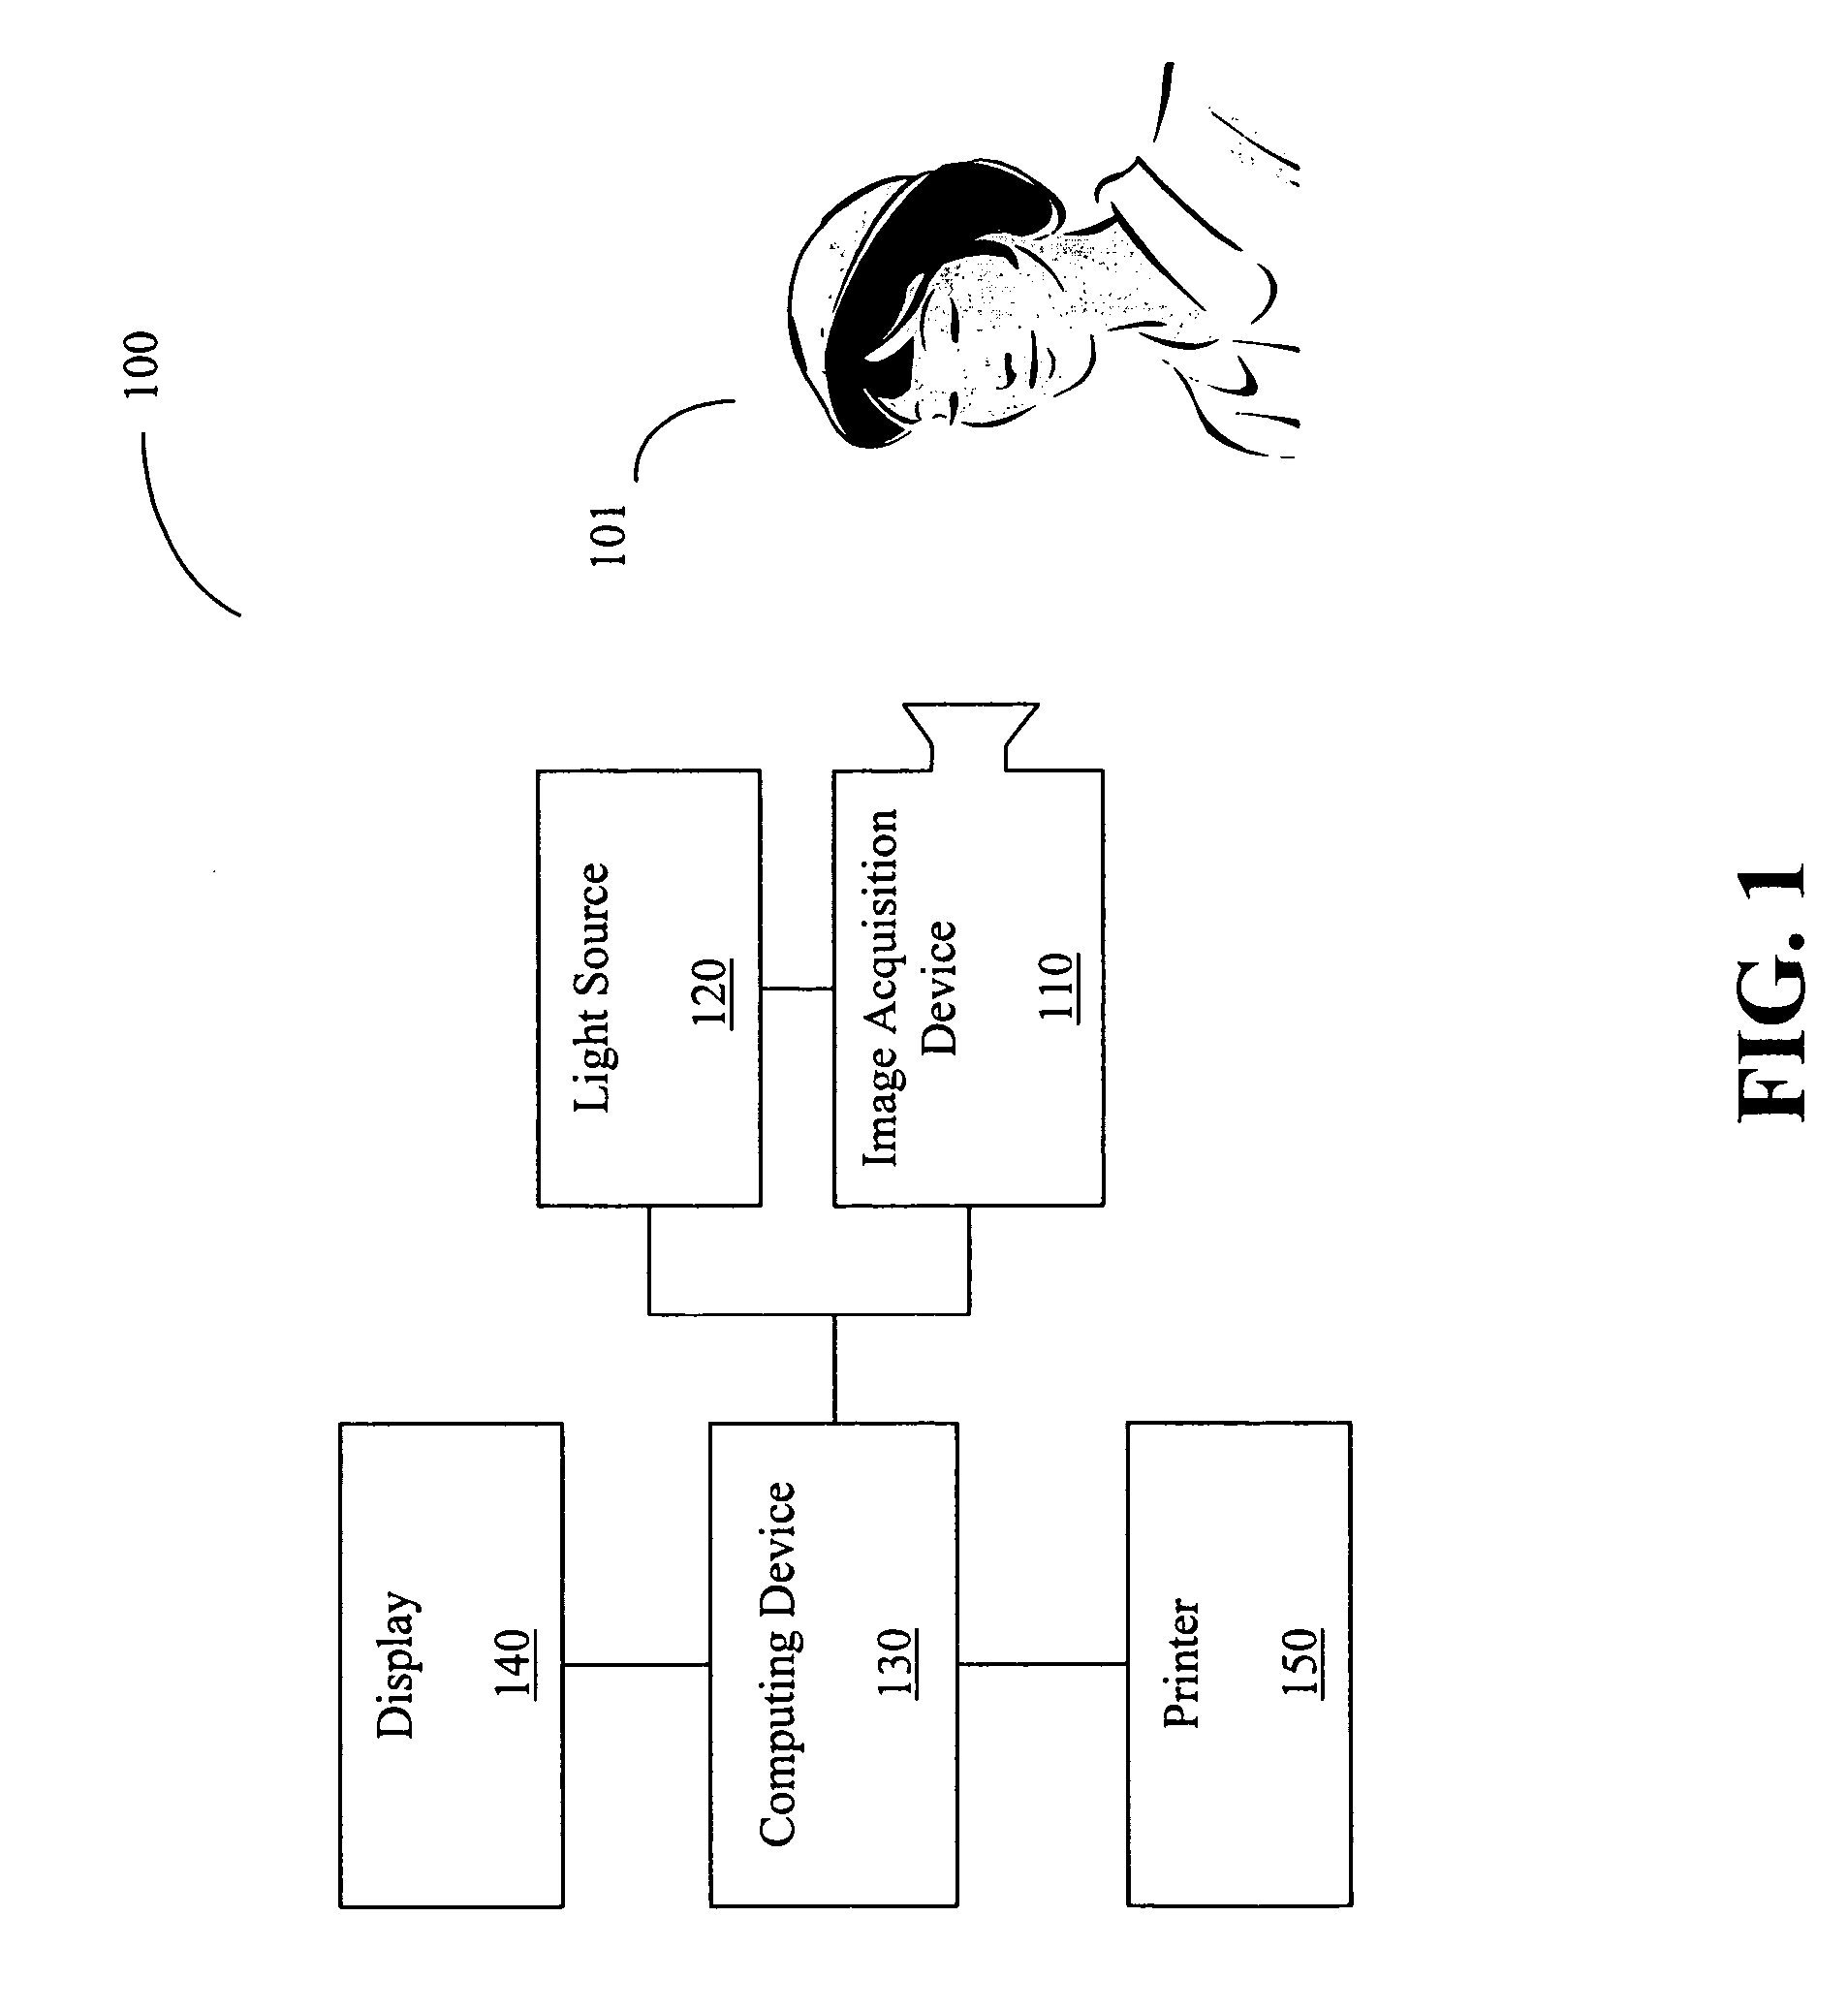 Method and system for analyzing skin conditions using digital images